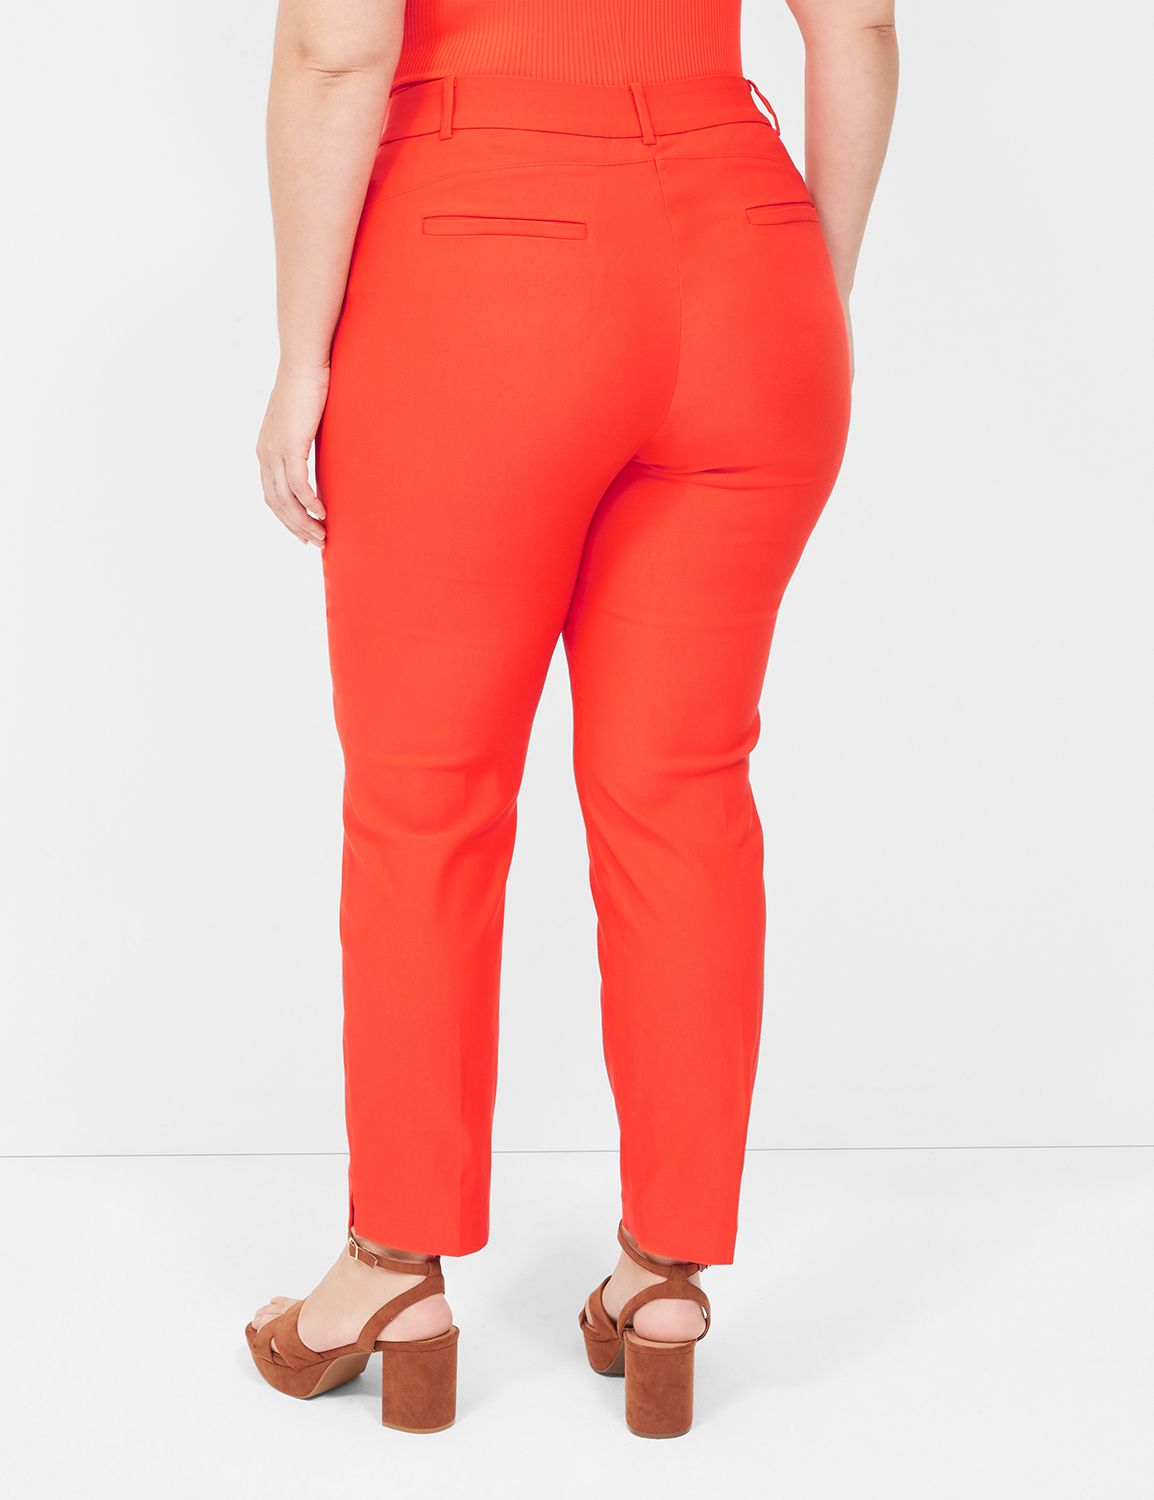 The Perfect Ankle Pant Is Currently 50% Off During Spanx's